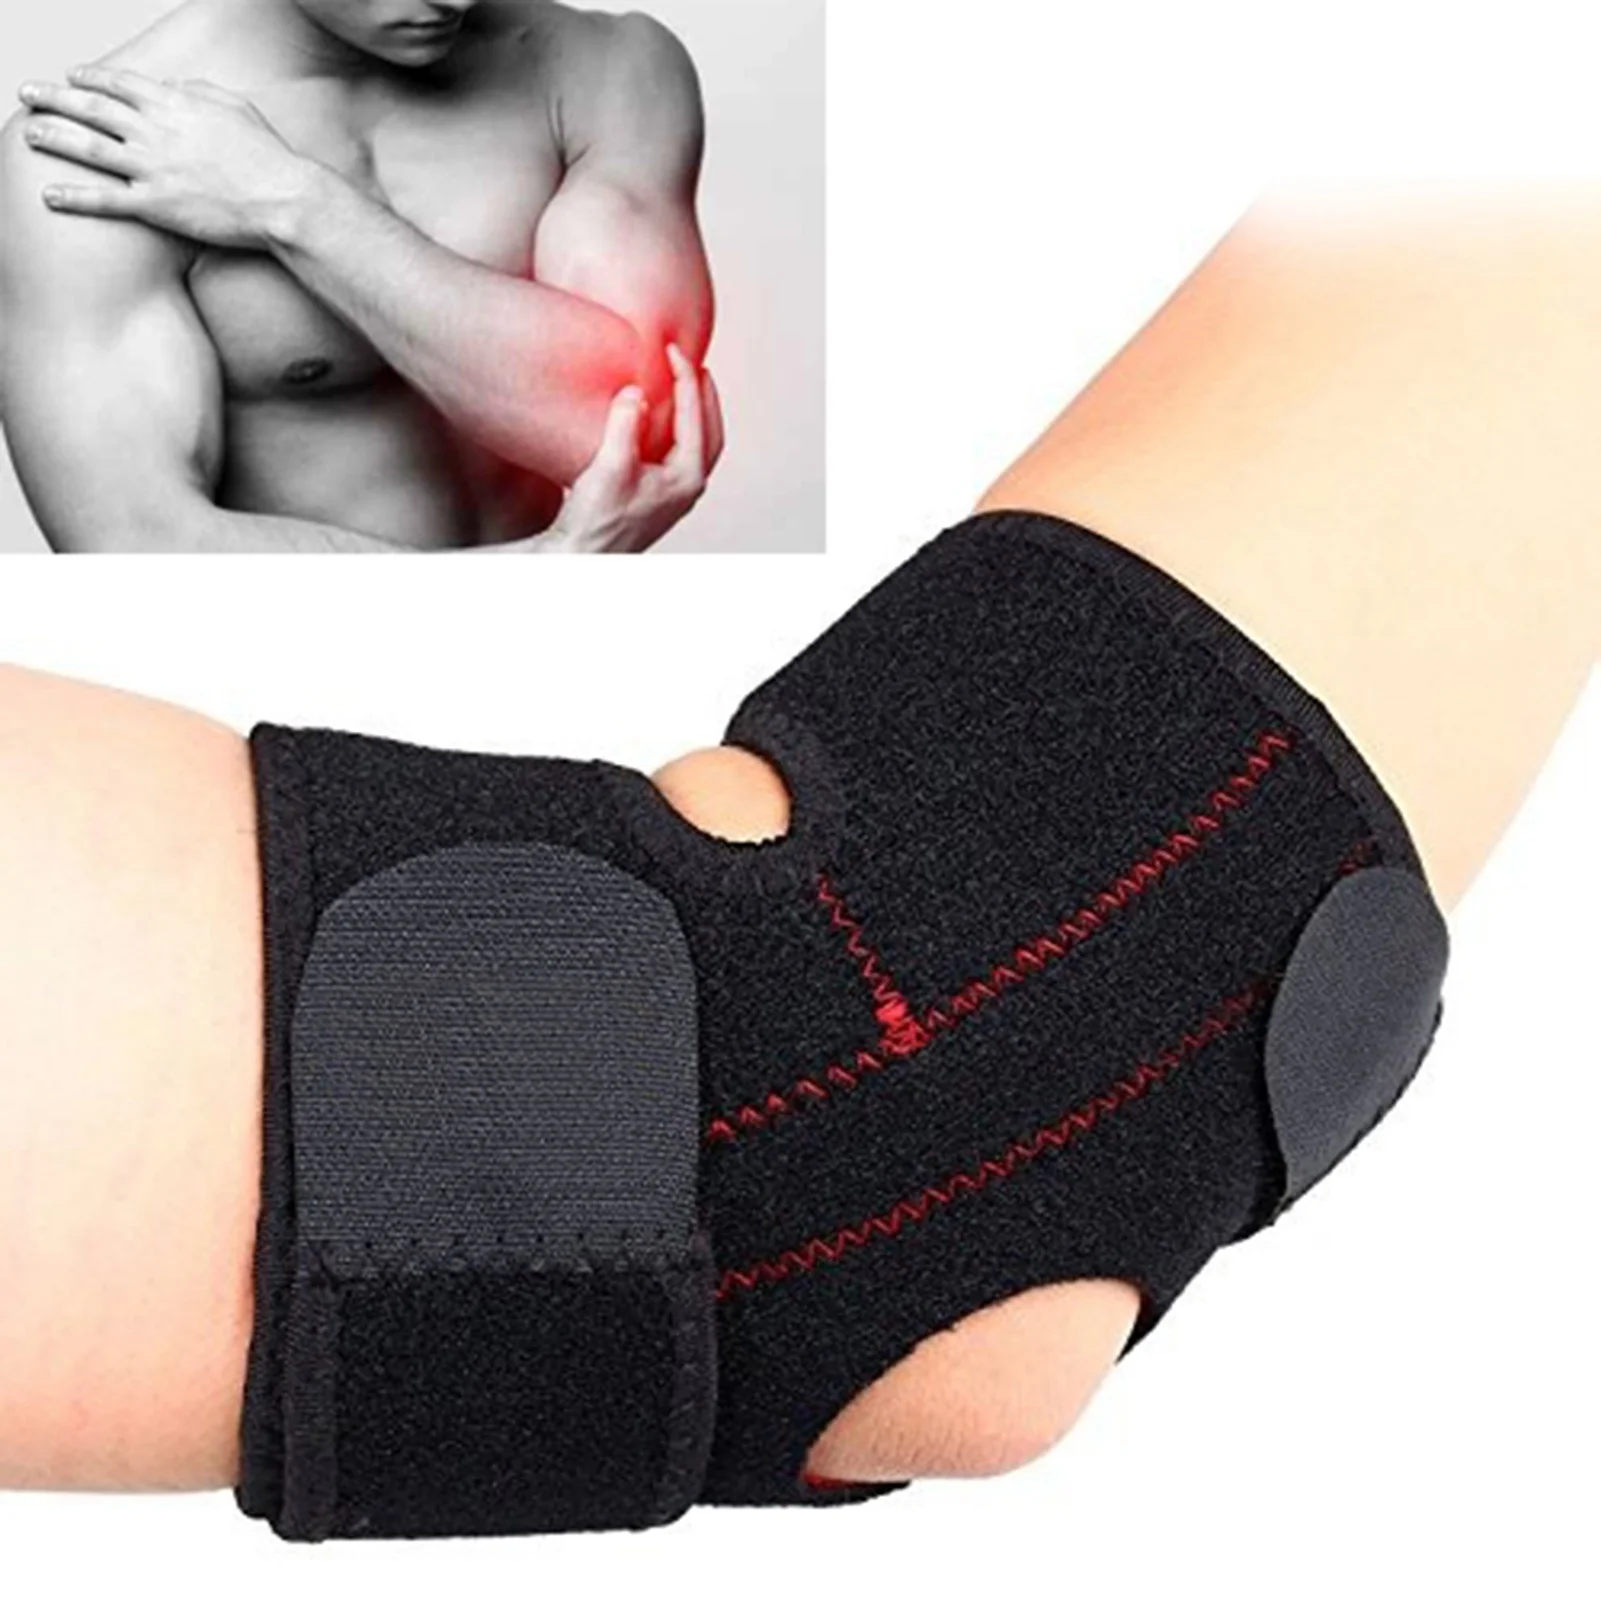 

Adjustable Neoprene Tennis Golfers Elbow Brace Wrap Arm Support Strap Band Arm Sleeve Wrap for Olecranon Joint